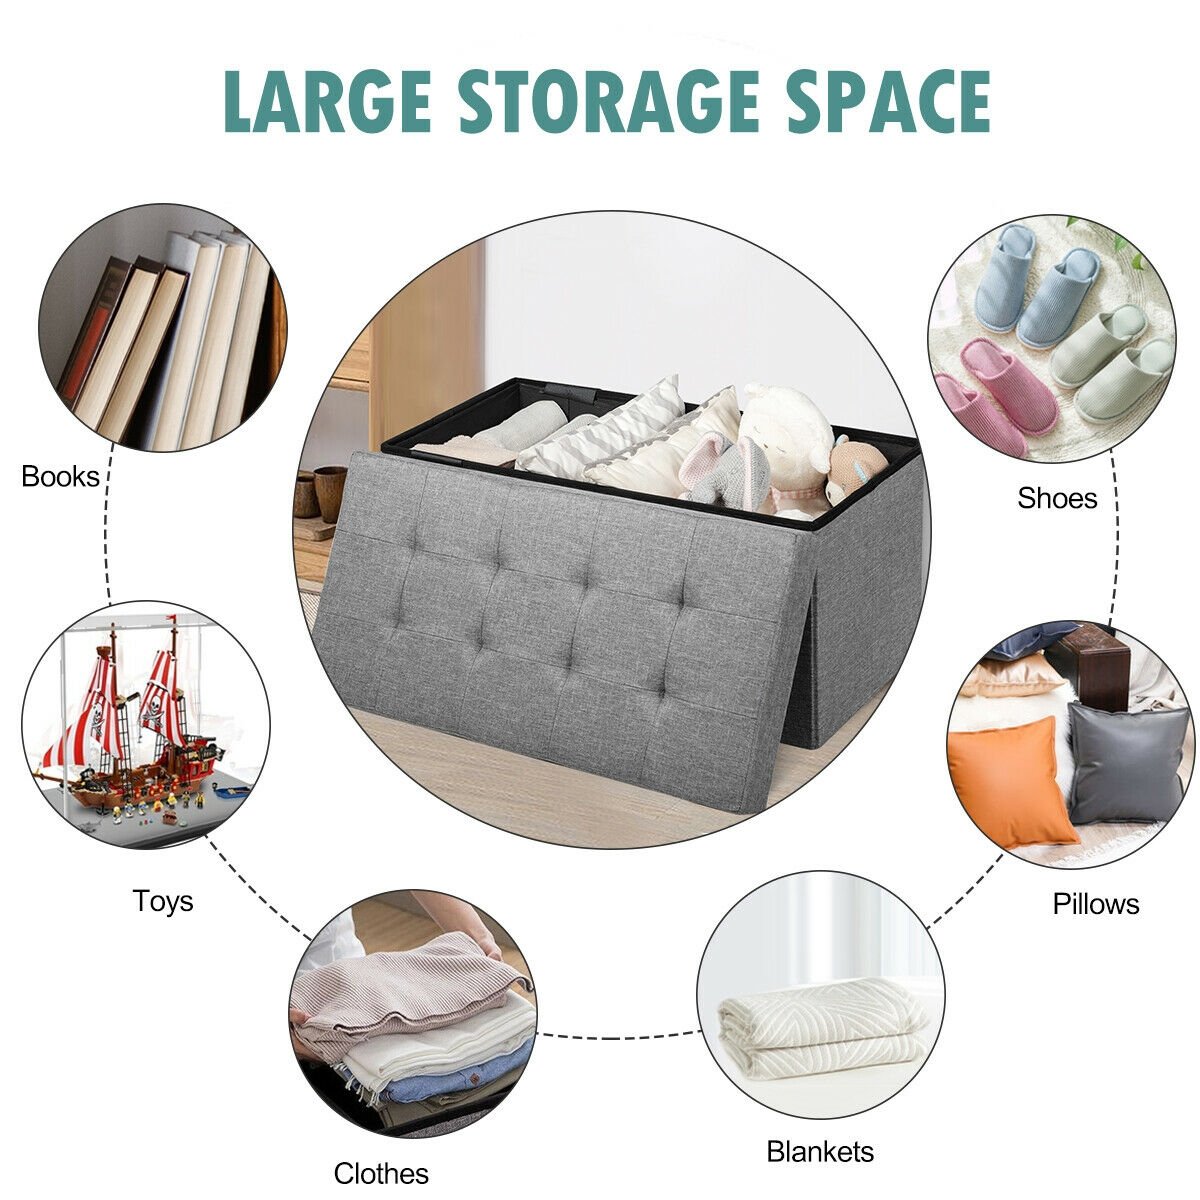 31.5 Inch Fabric Foldable Storage with Removable Storage Bin, Light Gray